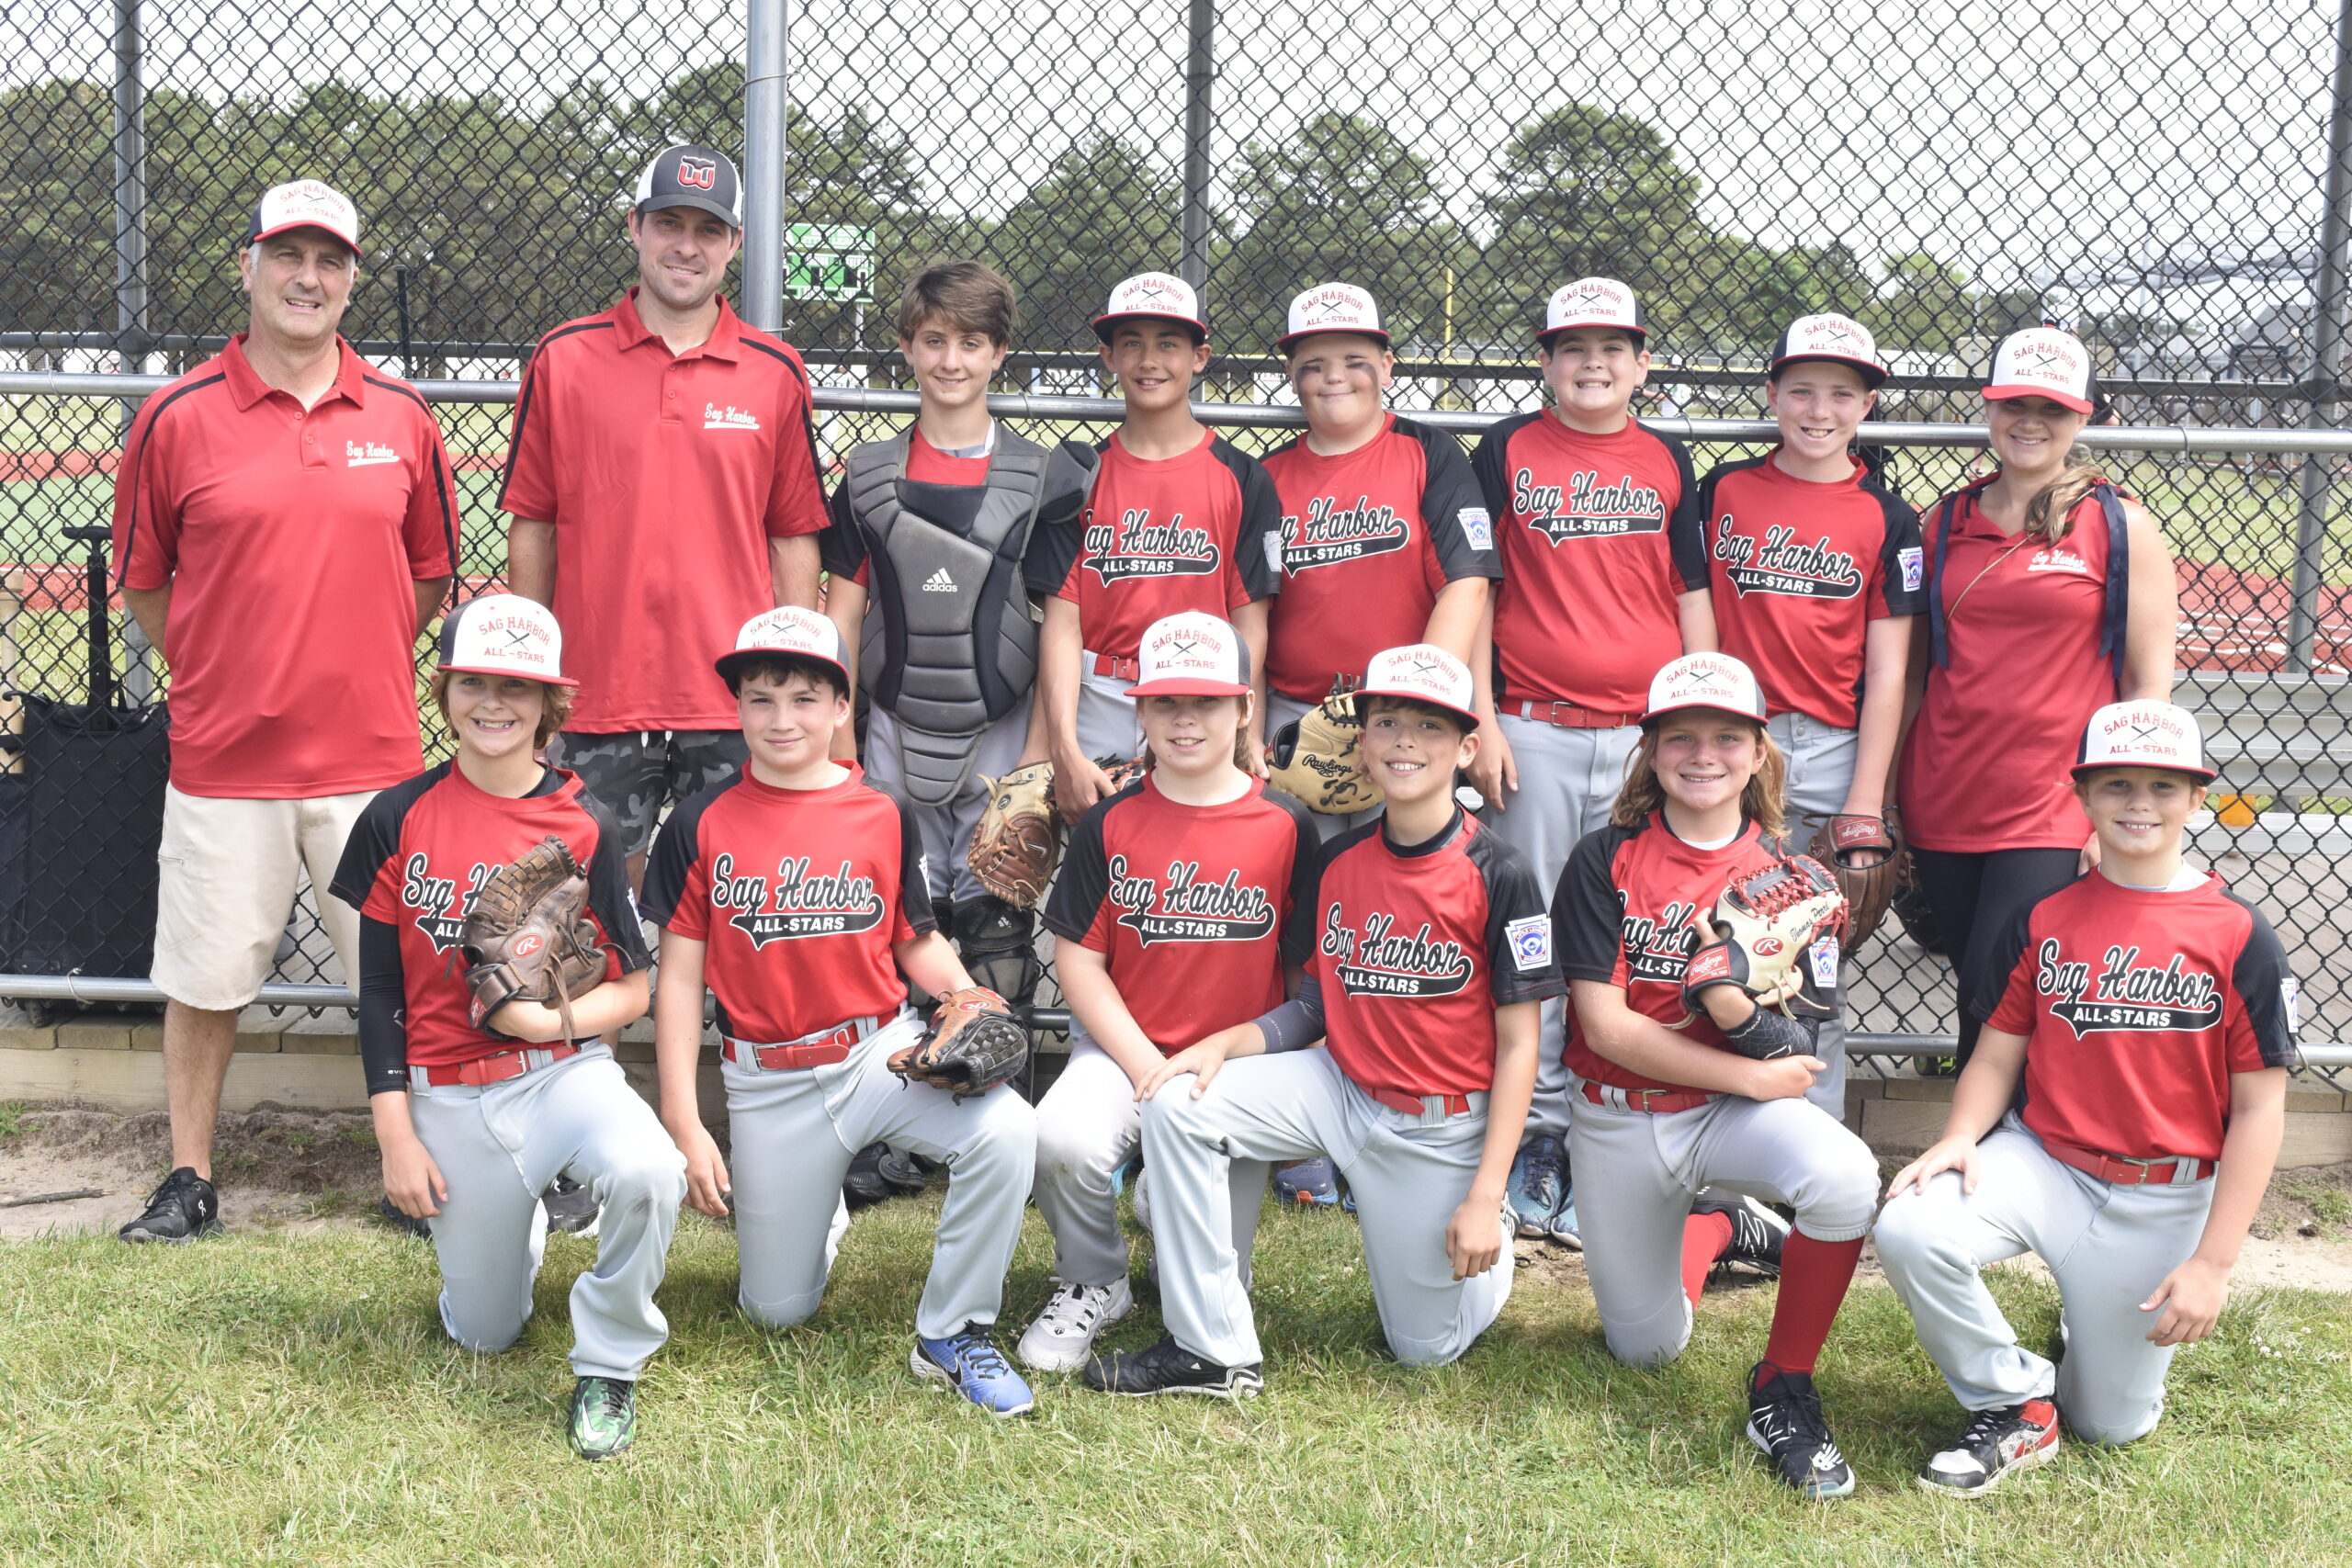 The Sag Harbor Majors All-Stars included, in no particular order, Cole Baxter, Anthony Cappiello, Aidan D'Angelo, Ashton Greene, Eli Hinchen, Cameron Mitchell, Eli McCleland, Thomas Perri, Keegan Reilly,  Zandar Schiavoni, Jaxson Schumann and Tyce Russo, along with coaches Keith Schumann, Paul D'Angelo and Kerry Perri.    DREW BUDD